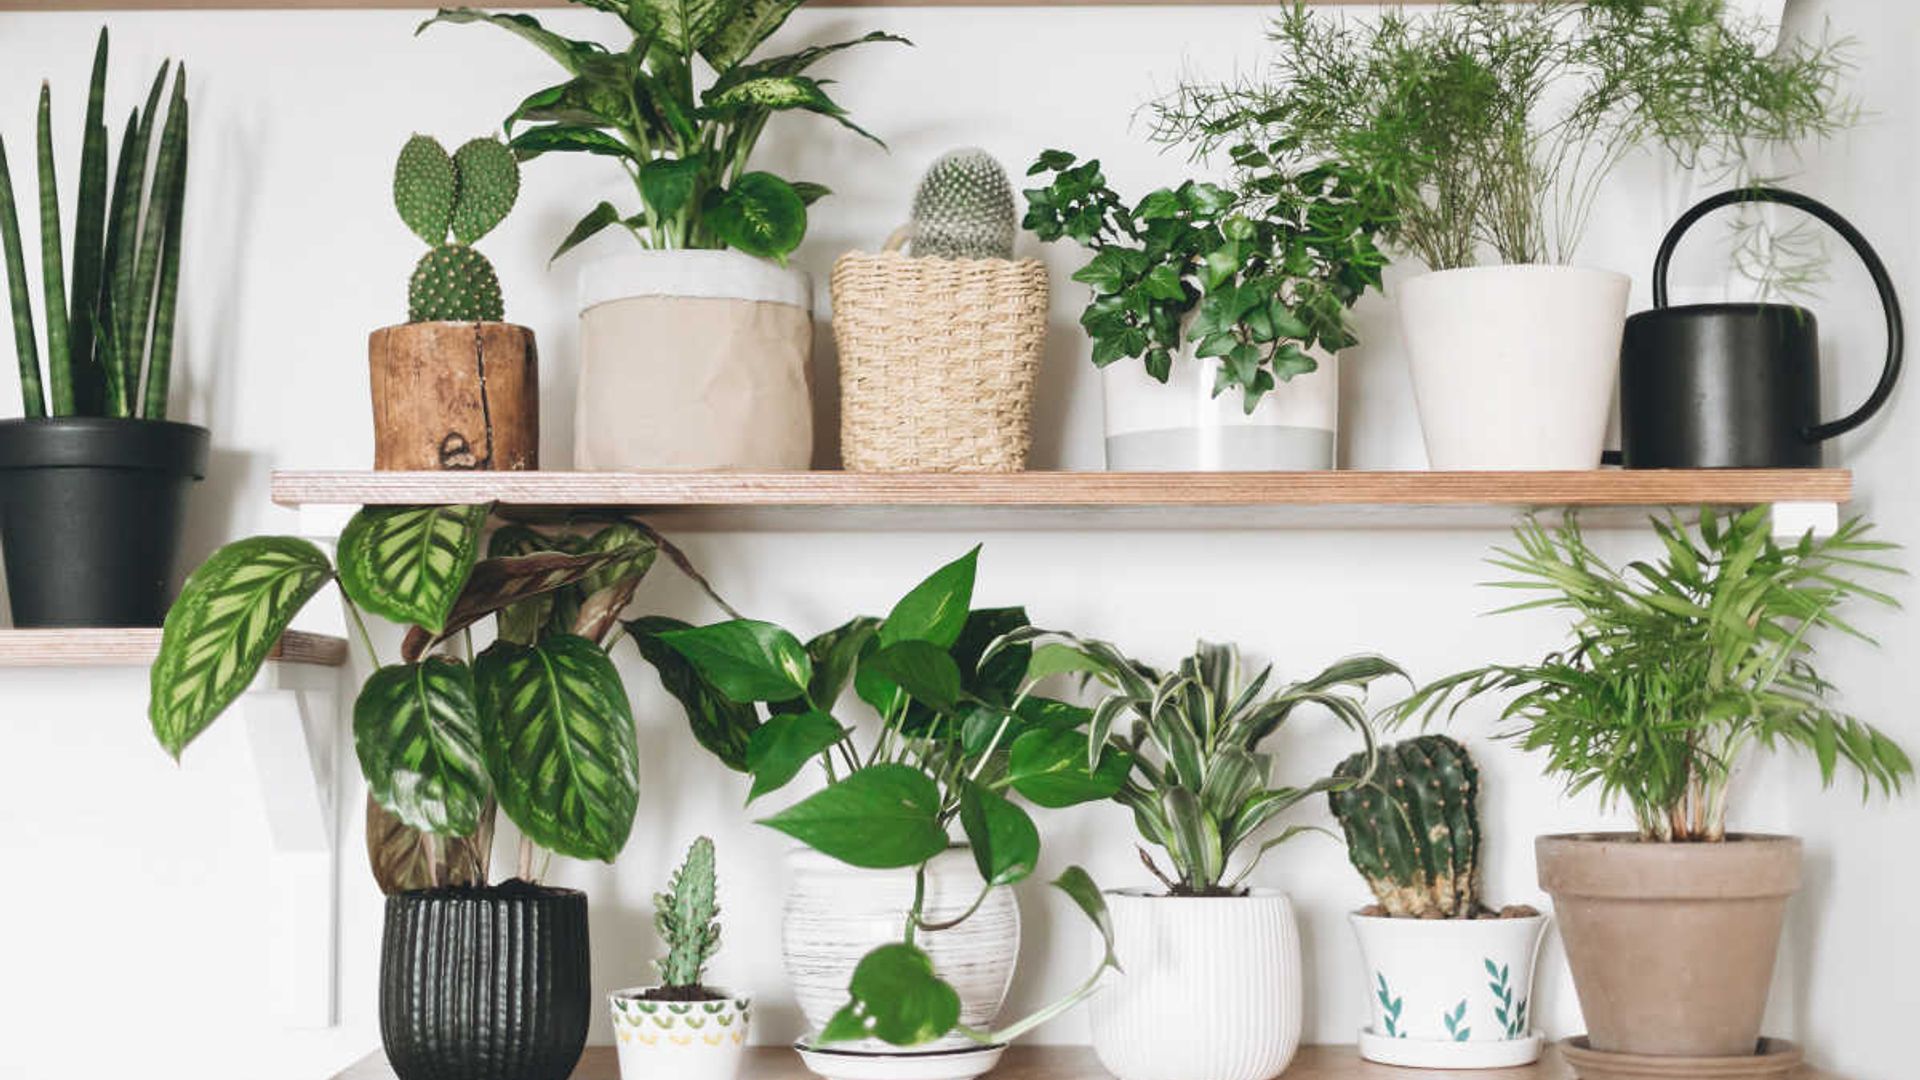 Lidl shoppers go wild for bargain houseplants - and they start at £1.69